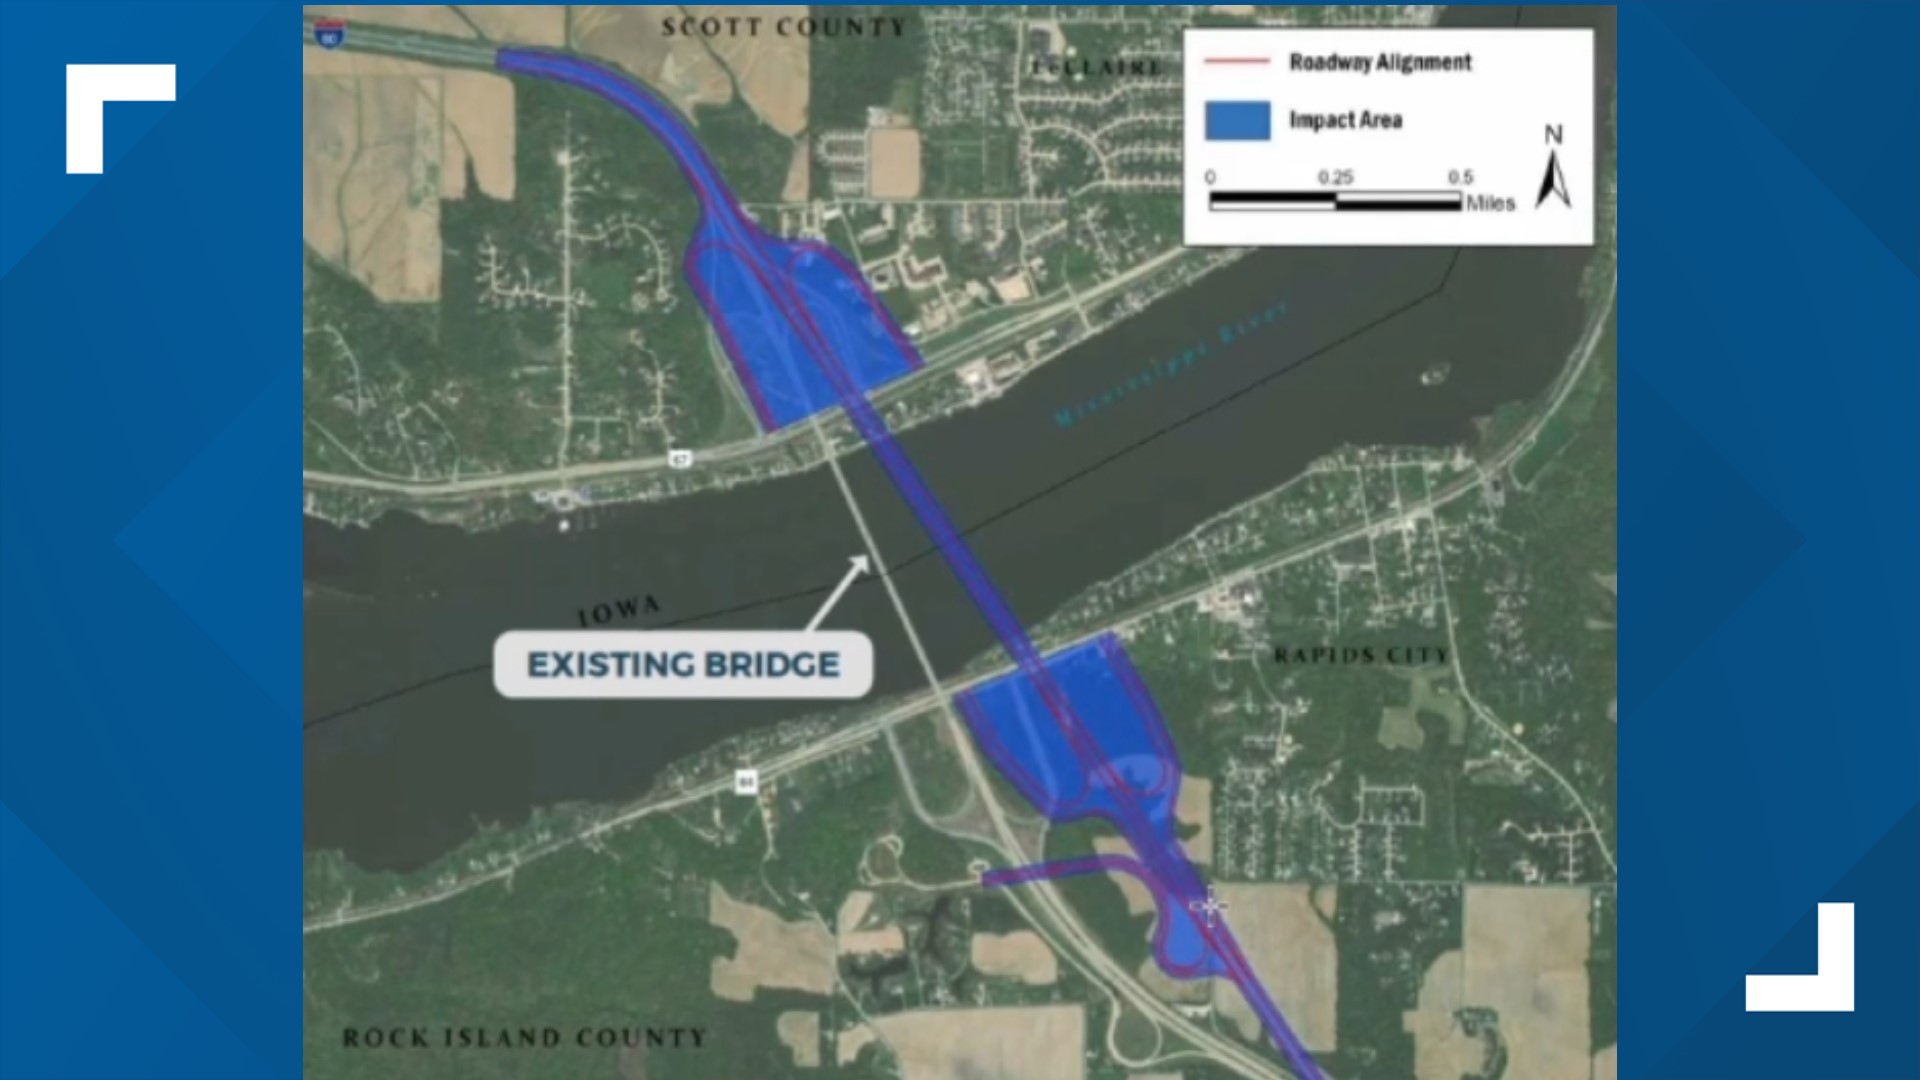 Project leaders say none of the proposed designs will weigh the proposed Bison Bridge and wildlife crossing during the selection process.